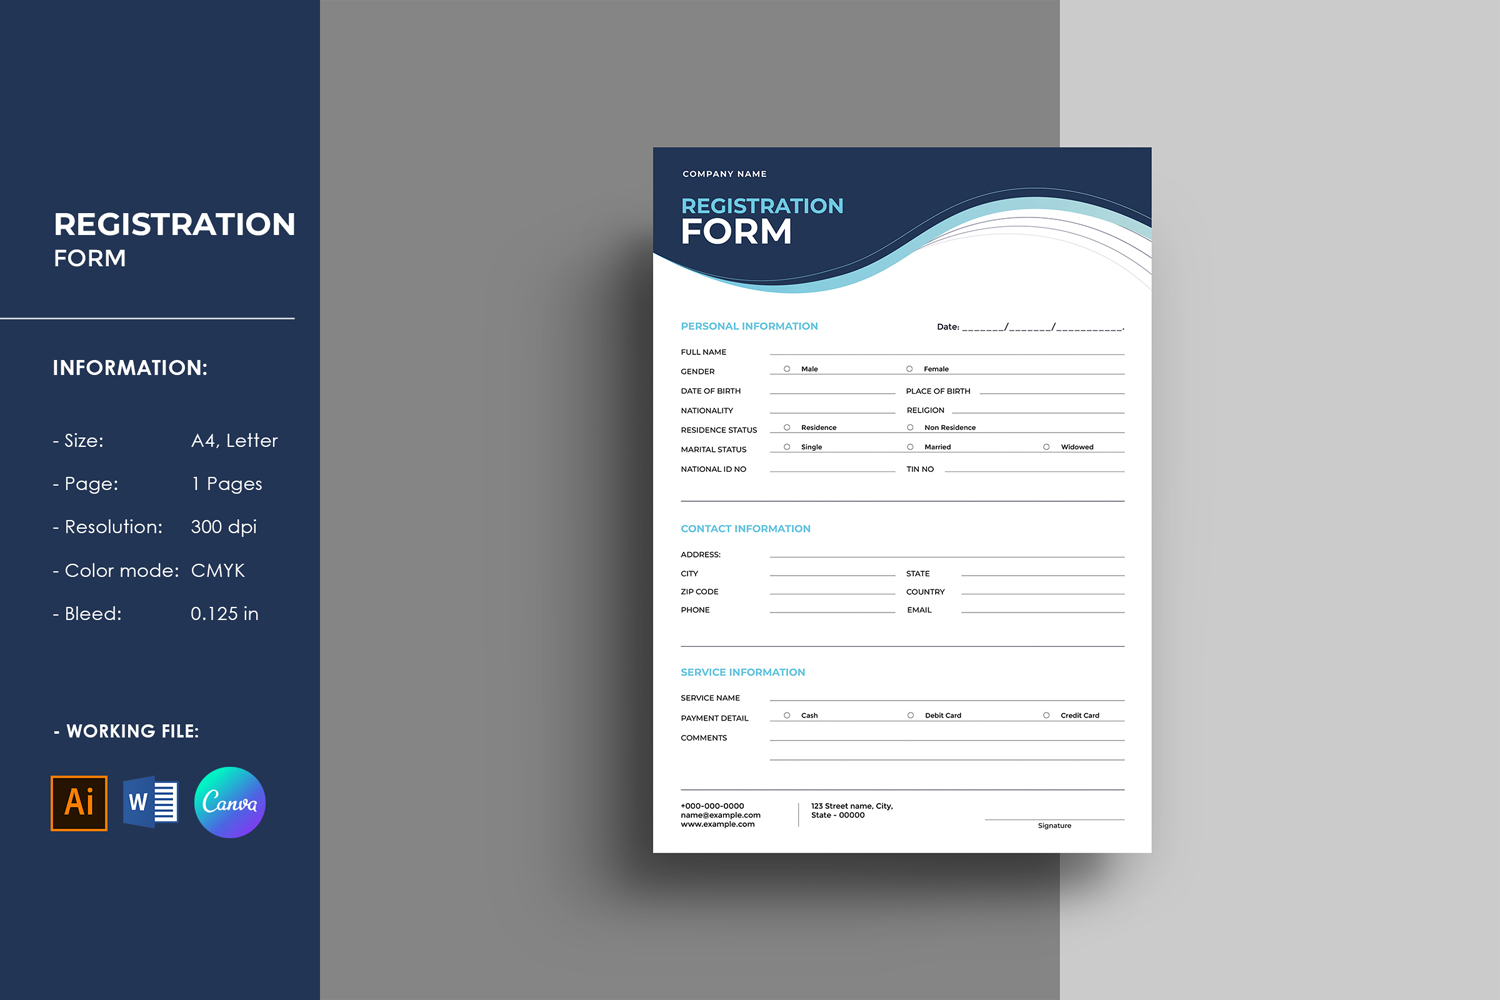 Registration Form Template. Word , Illustrator and Canva